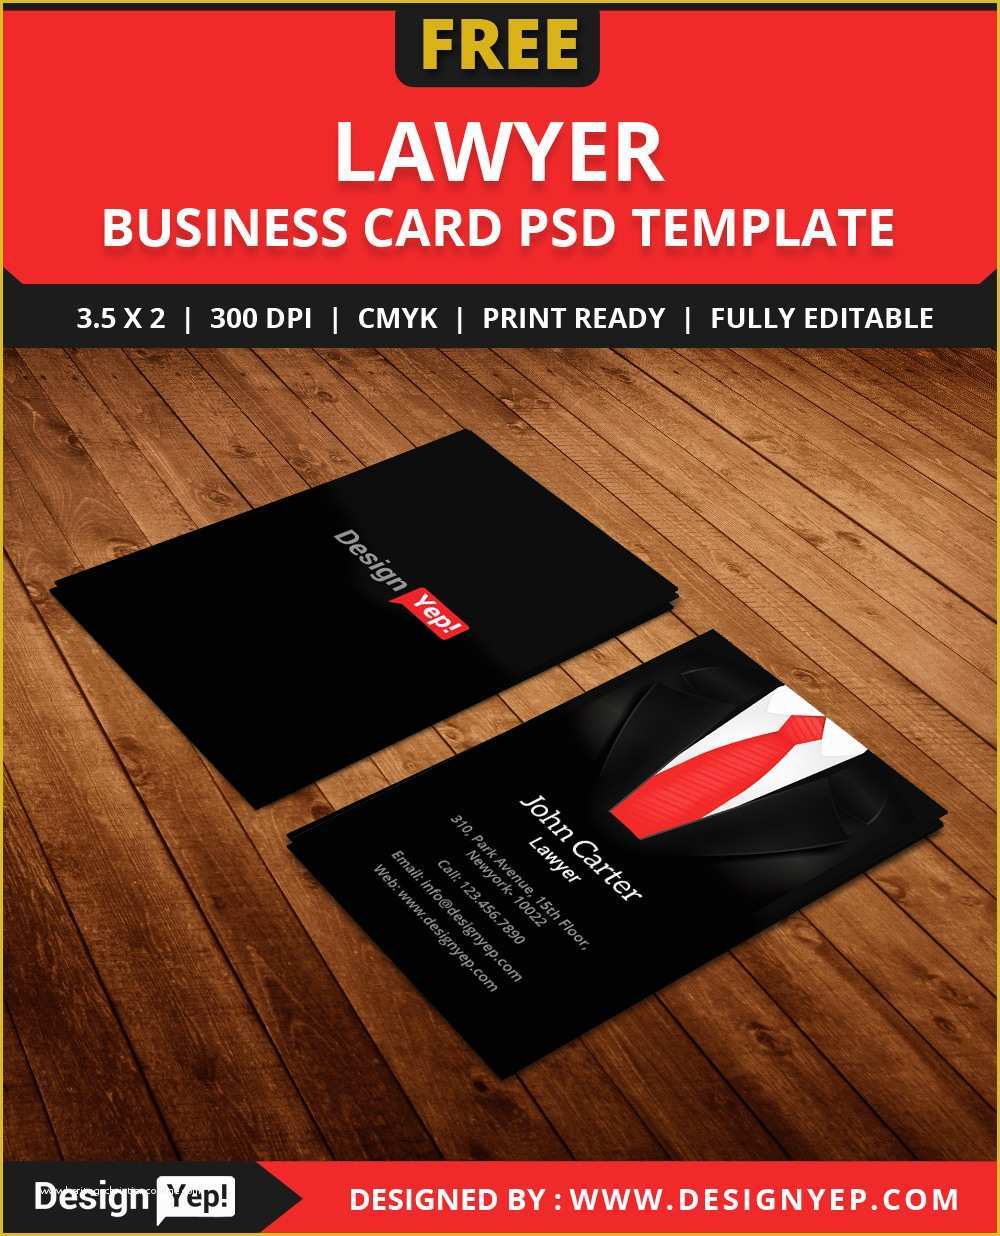 Lawyer Business Card Templates Free Of Free Lawyer Business Card Template Psd Designyep